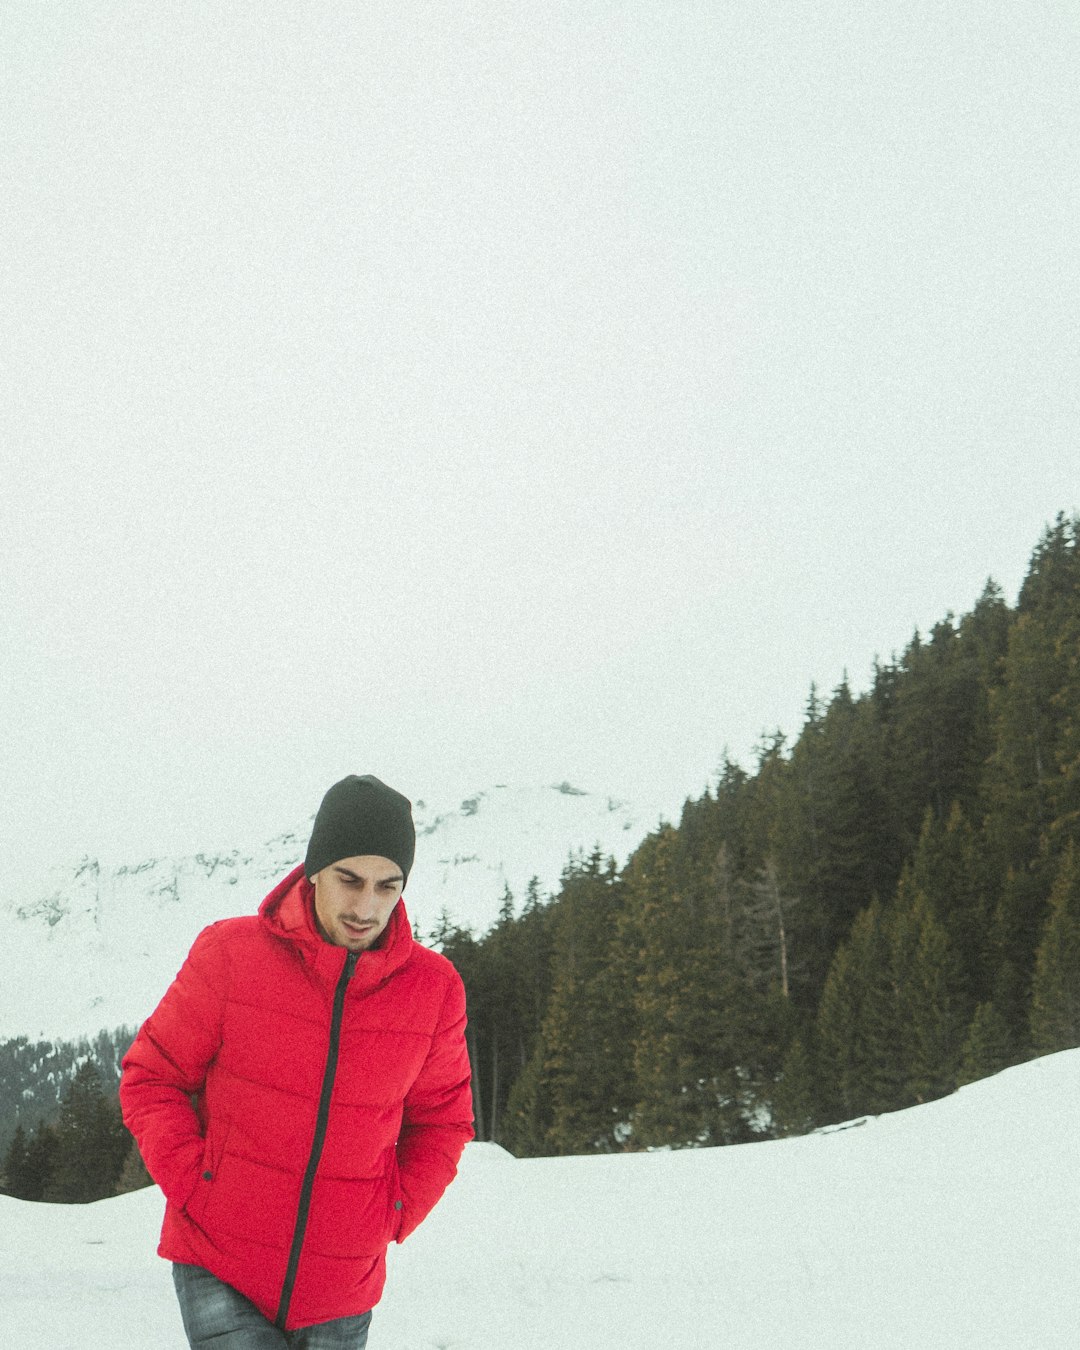 person in red winter jacket standing on snow covered ground during daytime